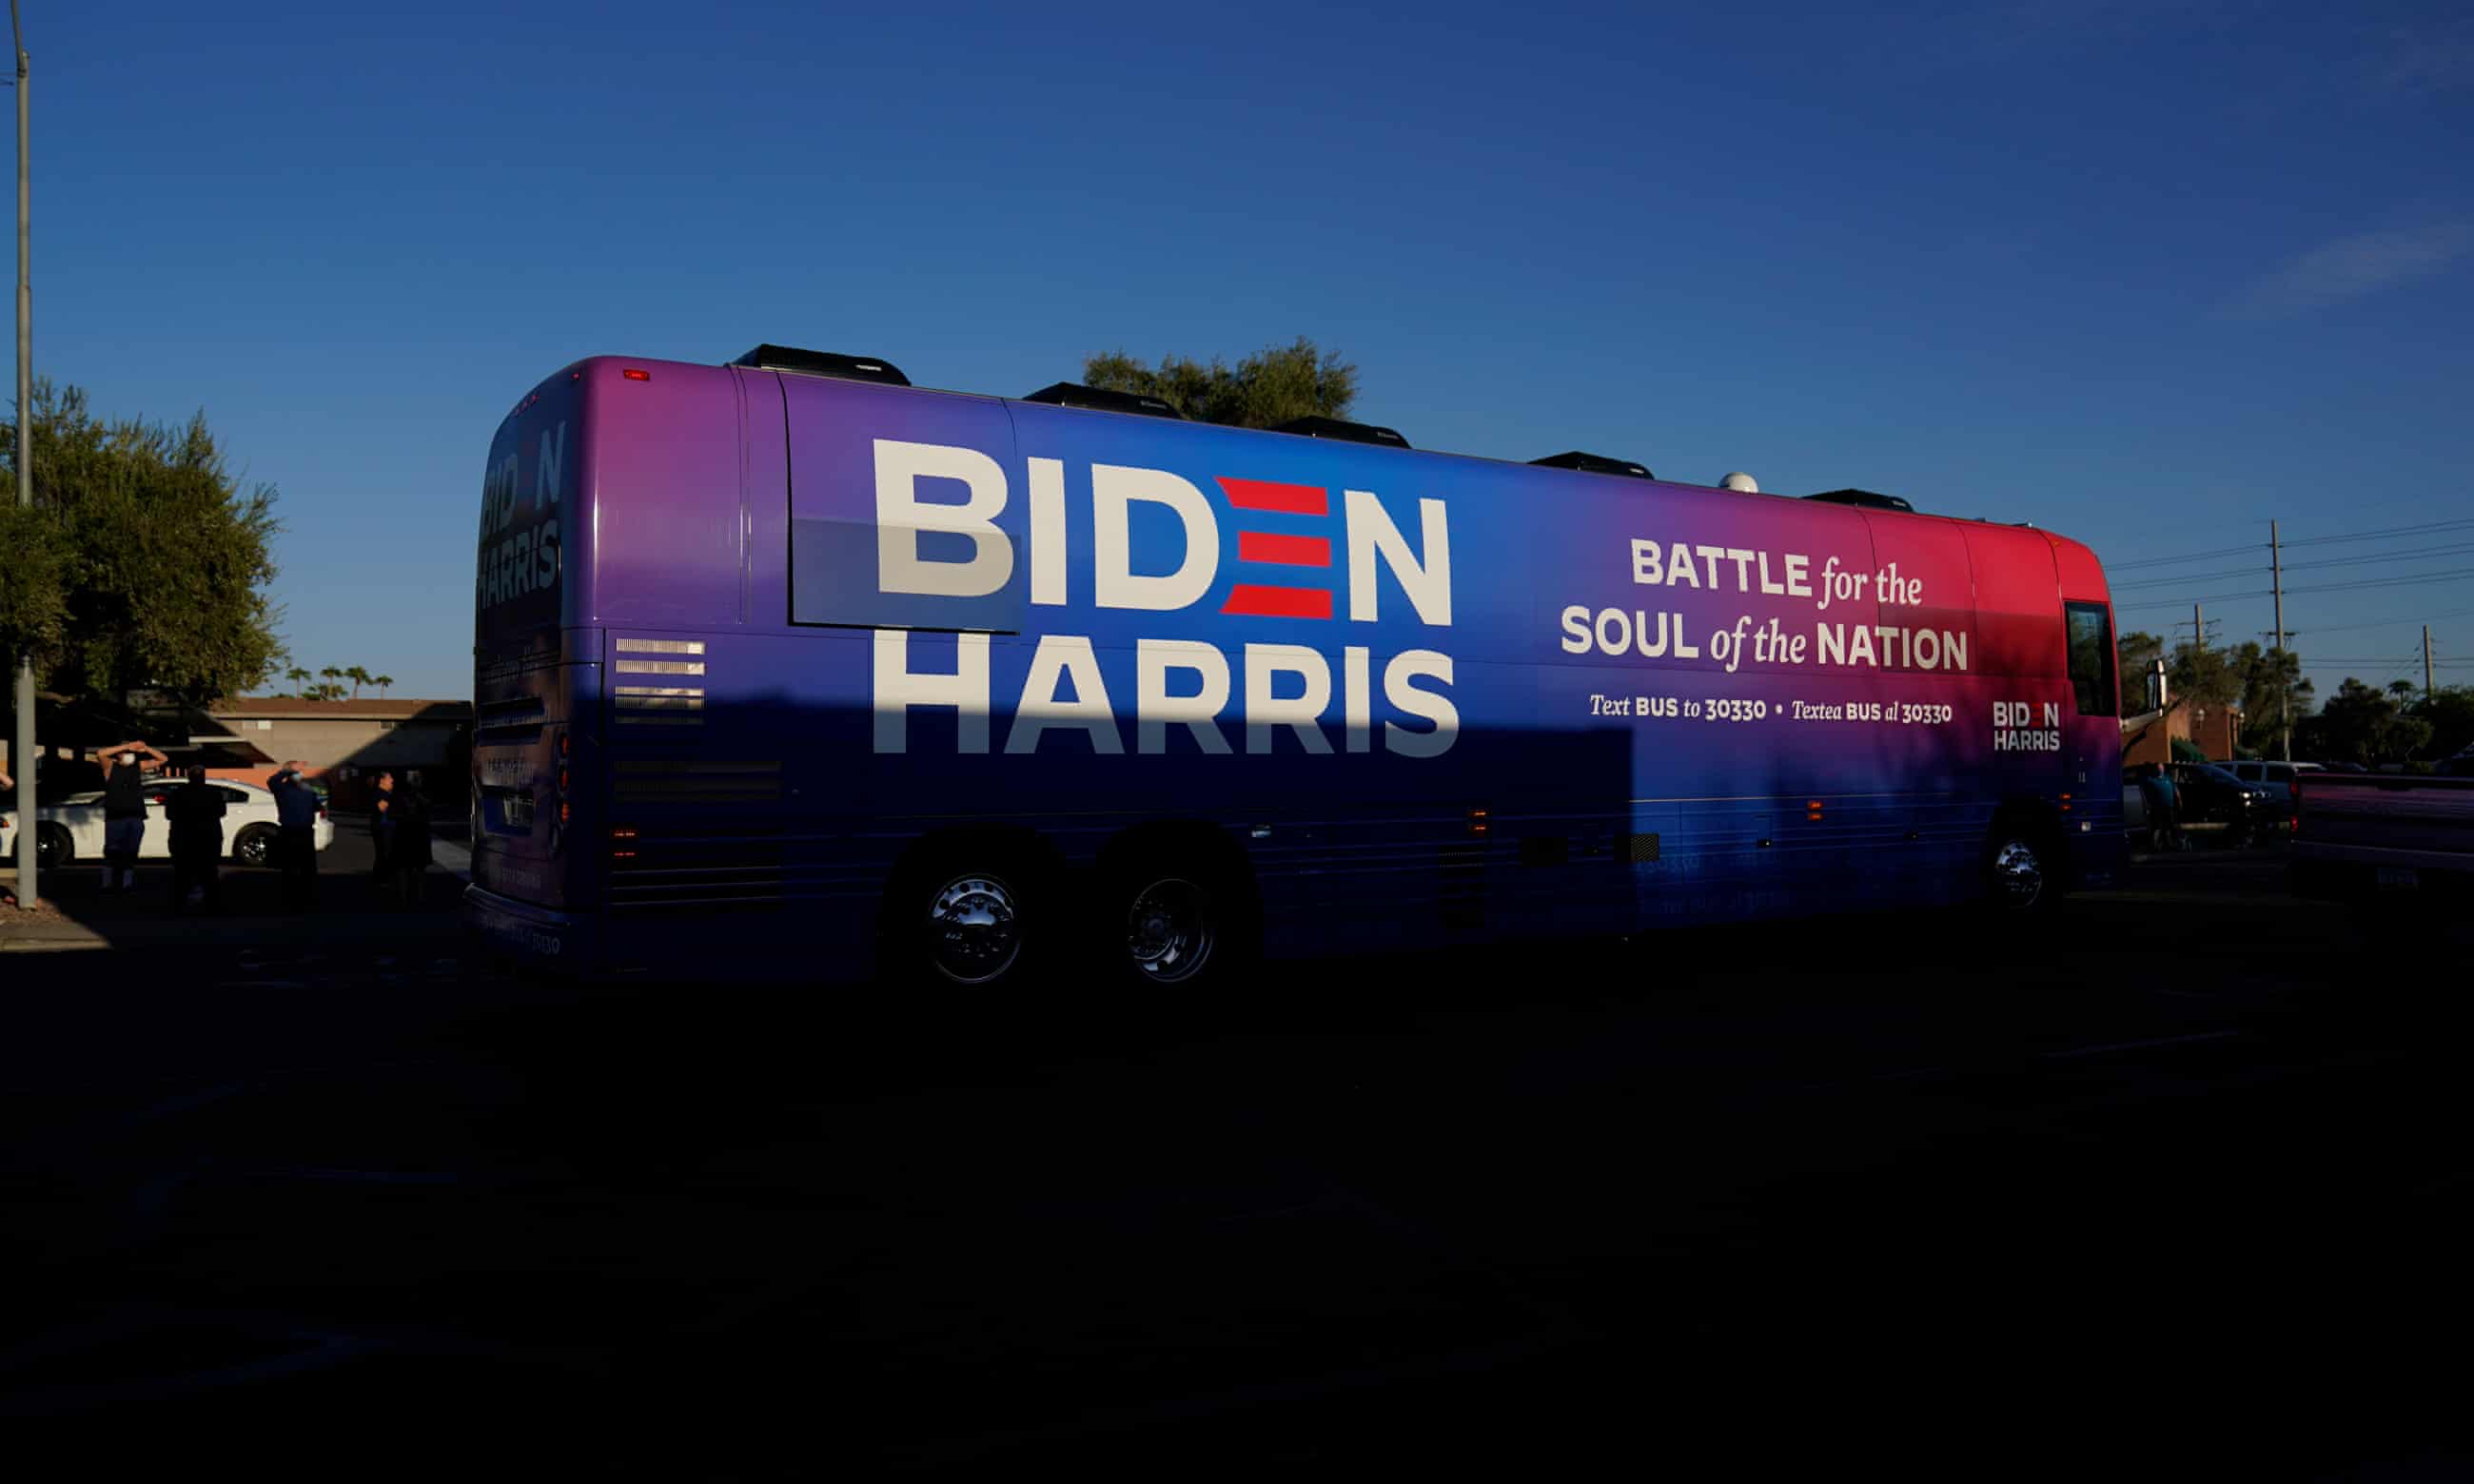 How a ‘Trump train’ attack on a Biden bus foreshadowed January 6 – and echoed bloody history (theguardian.com)